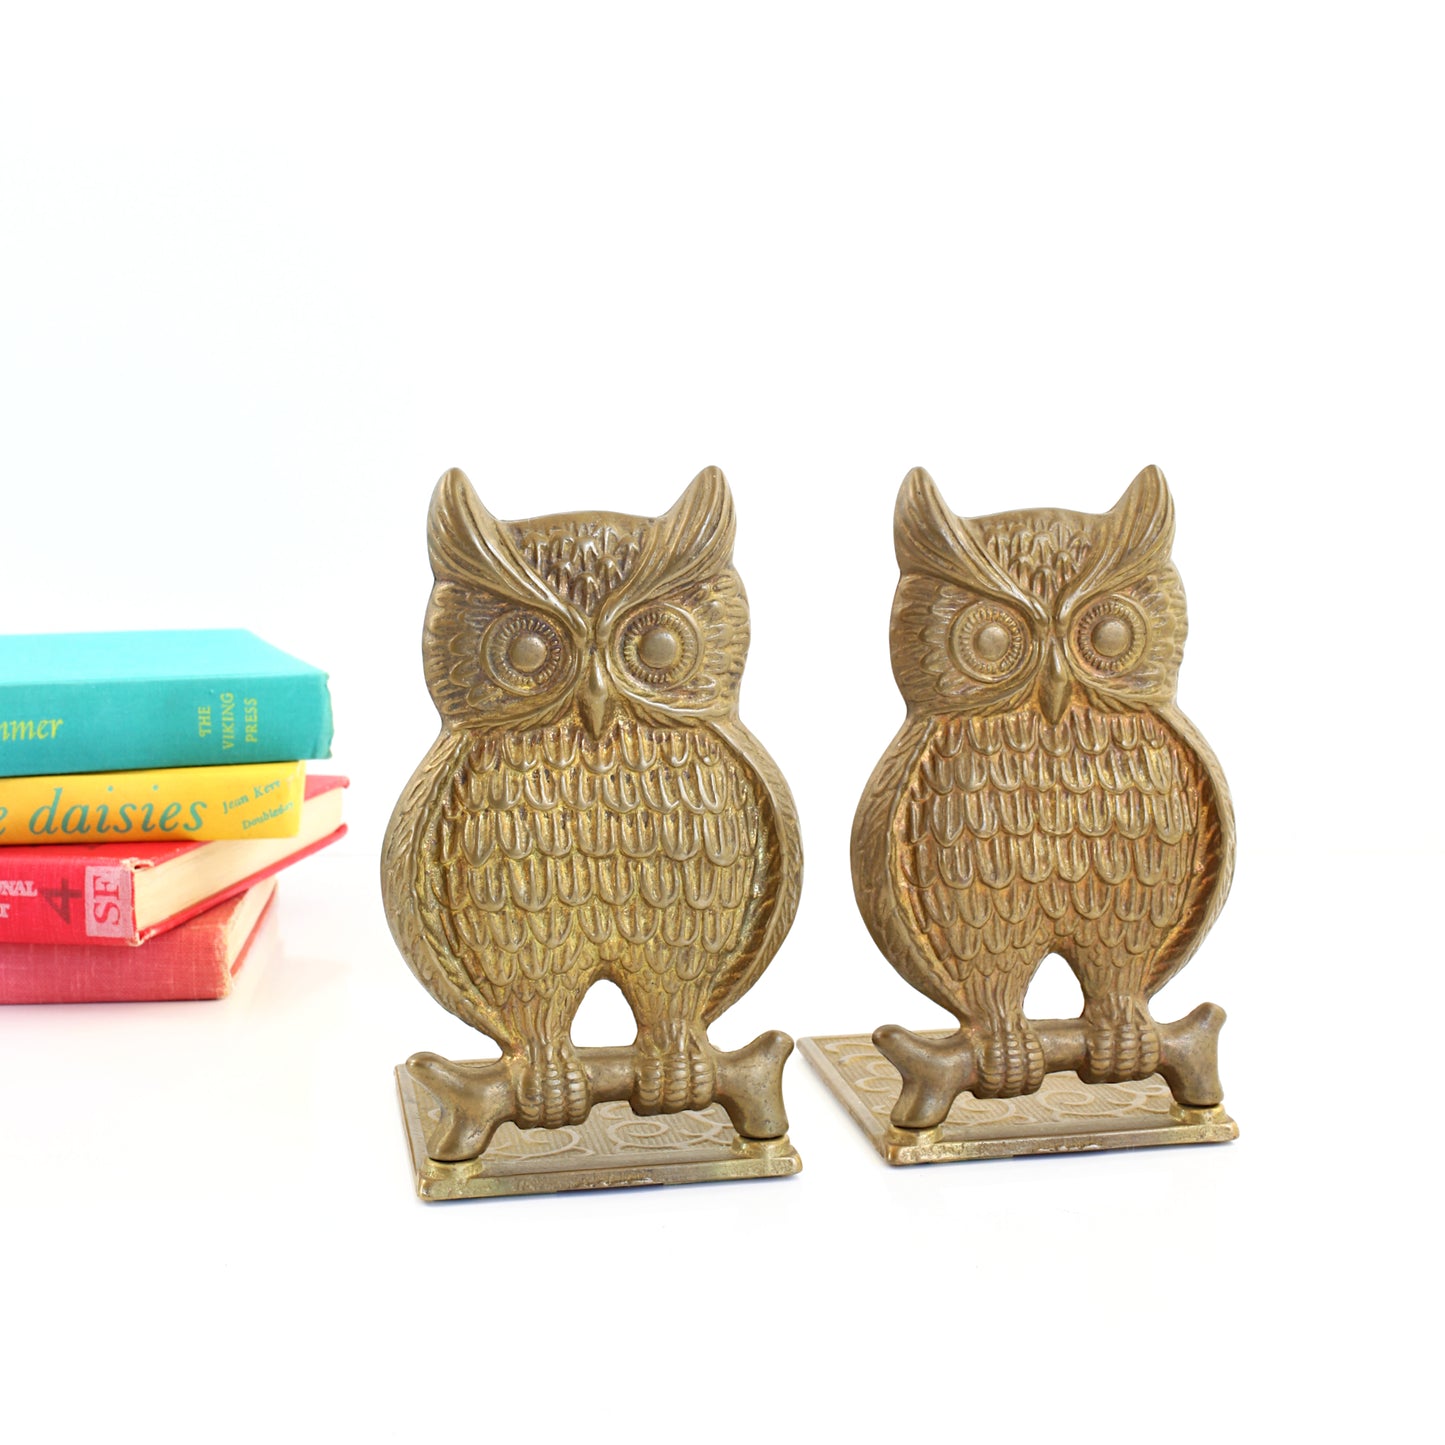 SOLD - Vintage Brass Owl Bookends